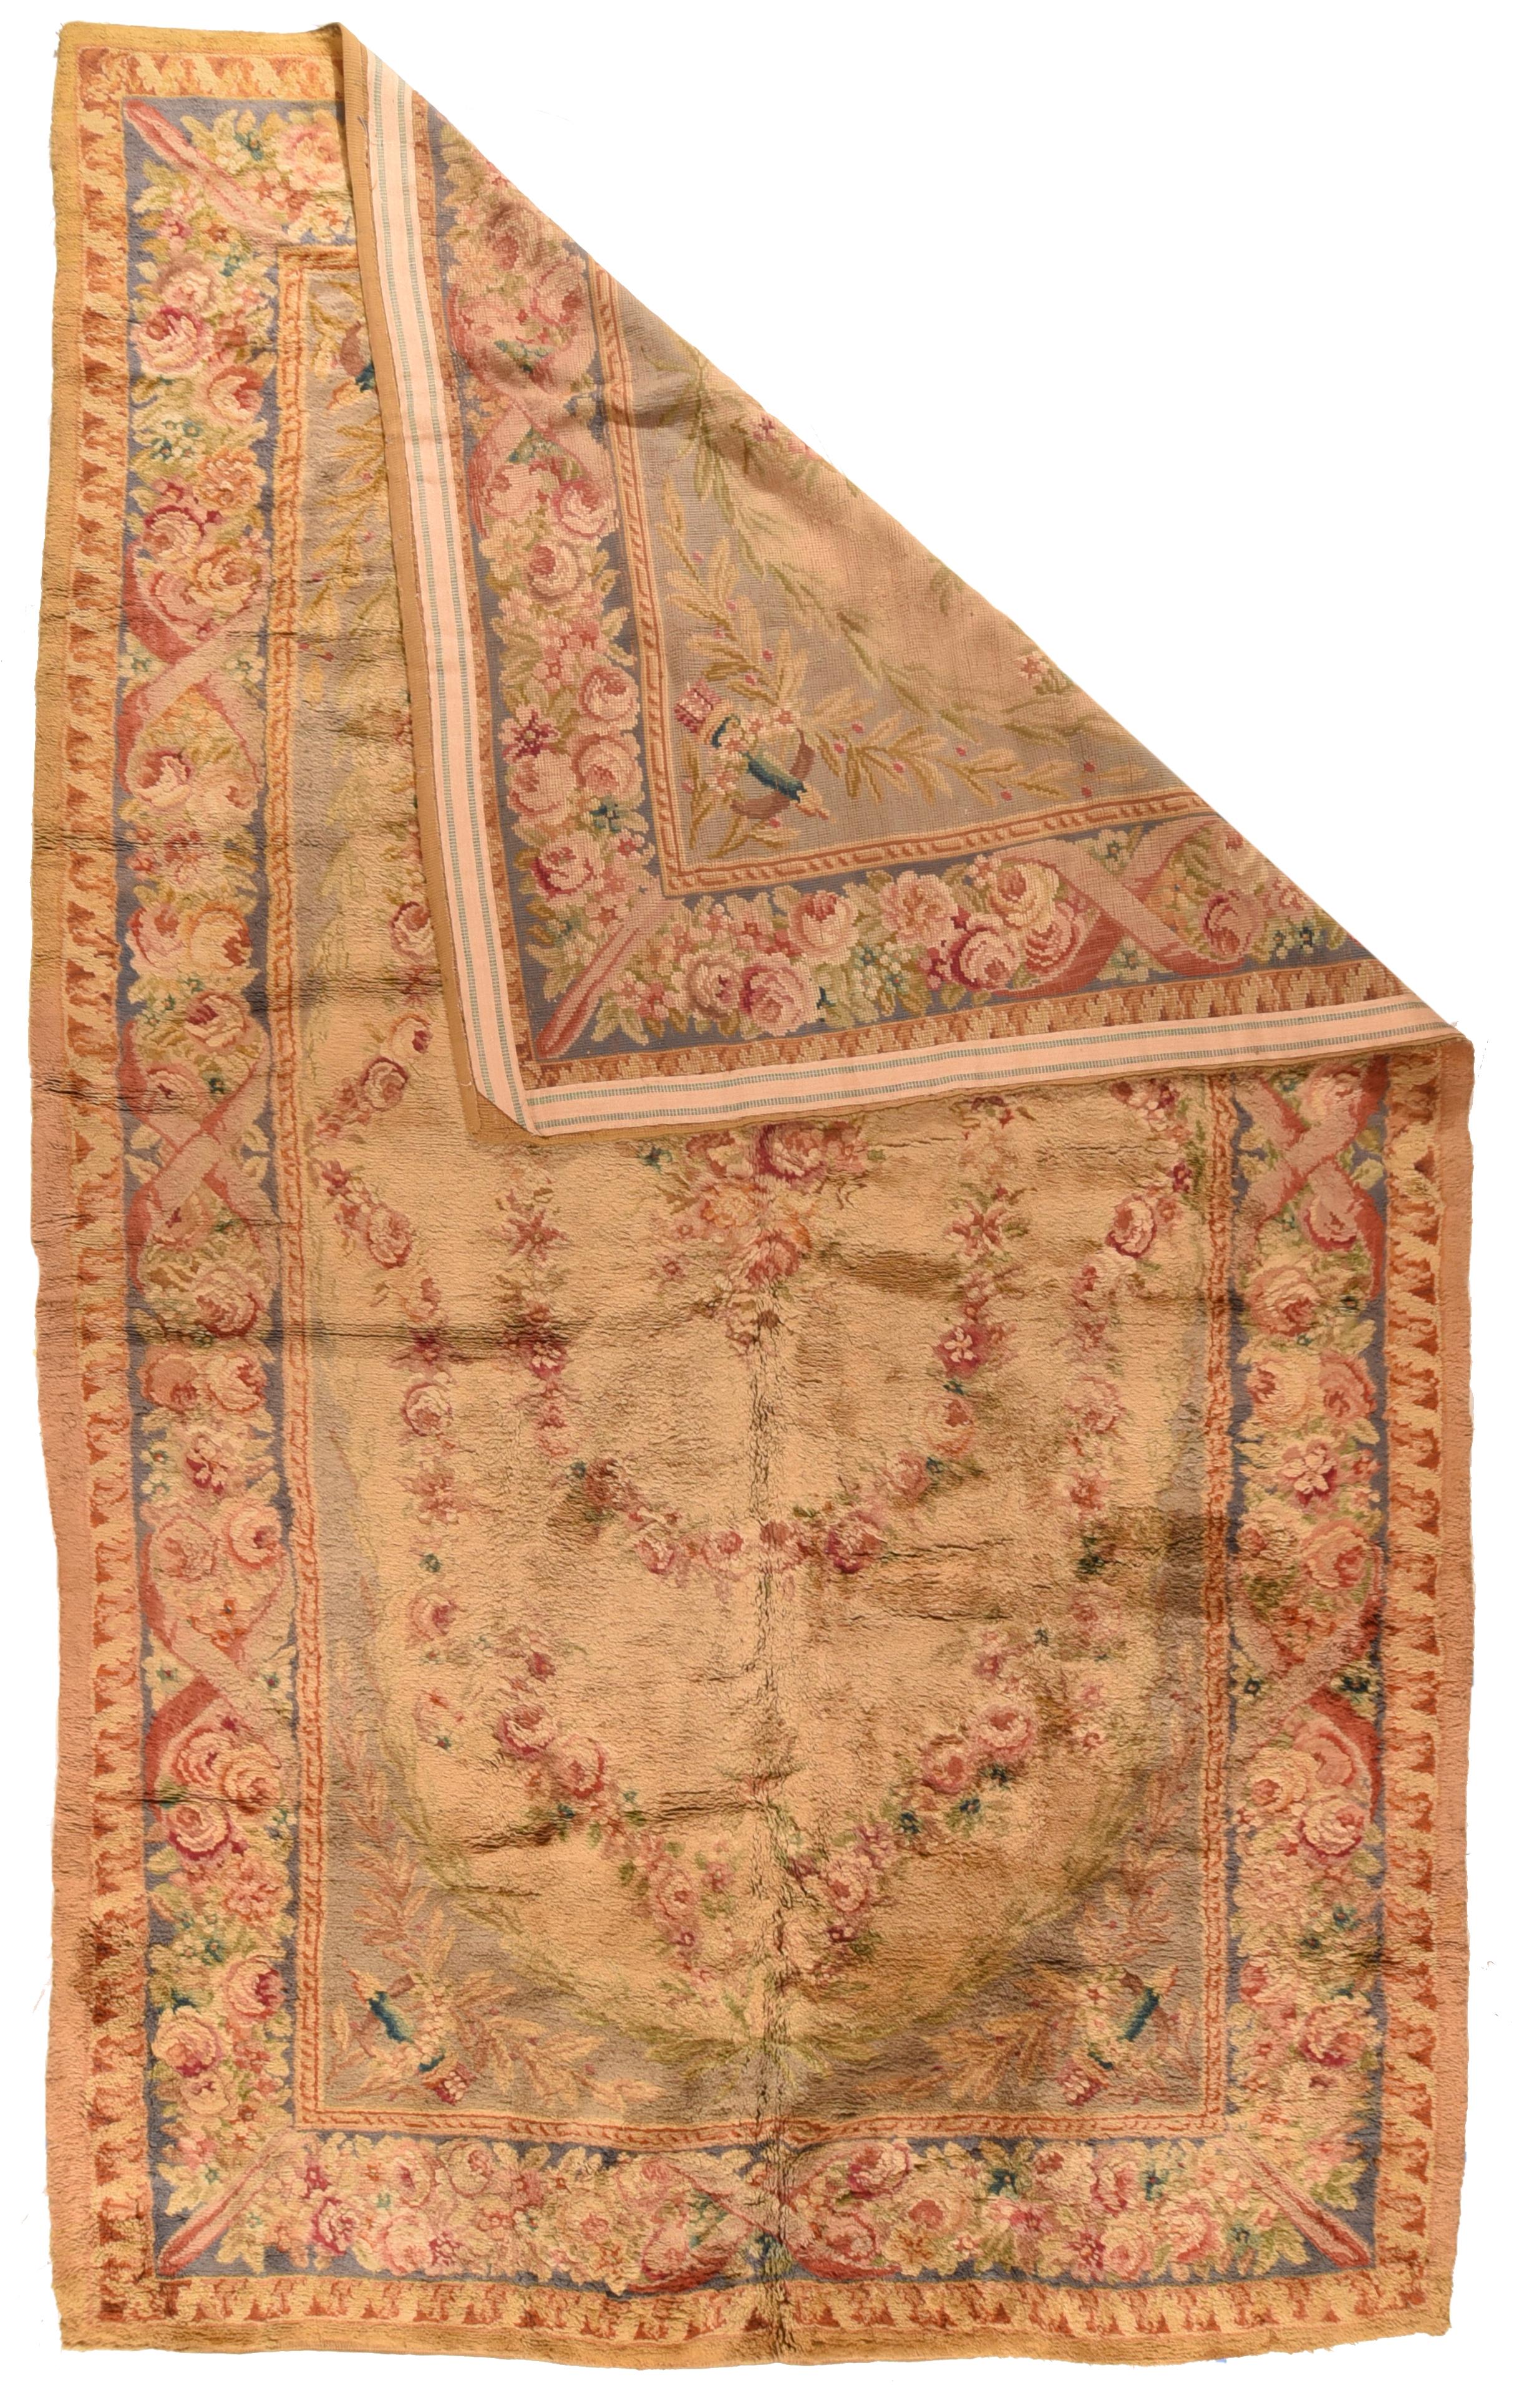 Antique French Savonnerie Rug 9'9'' x 16'0''. The straw cartouche-oval sub-field shows conforming and elliptical floral rose-accented wreaths surrounding a central rose bouquet. The supporting pale blue-grey ground shows in the laurel branch